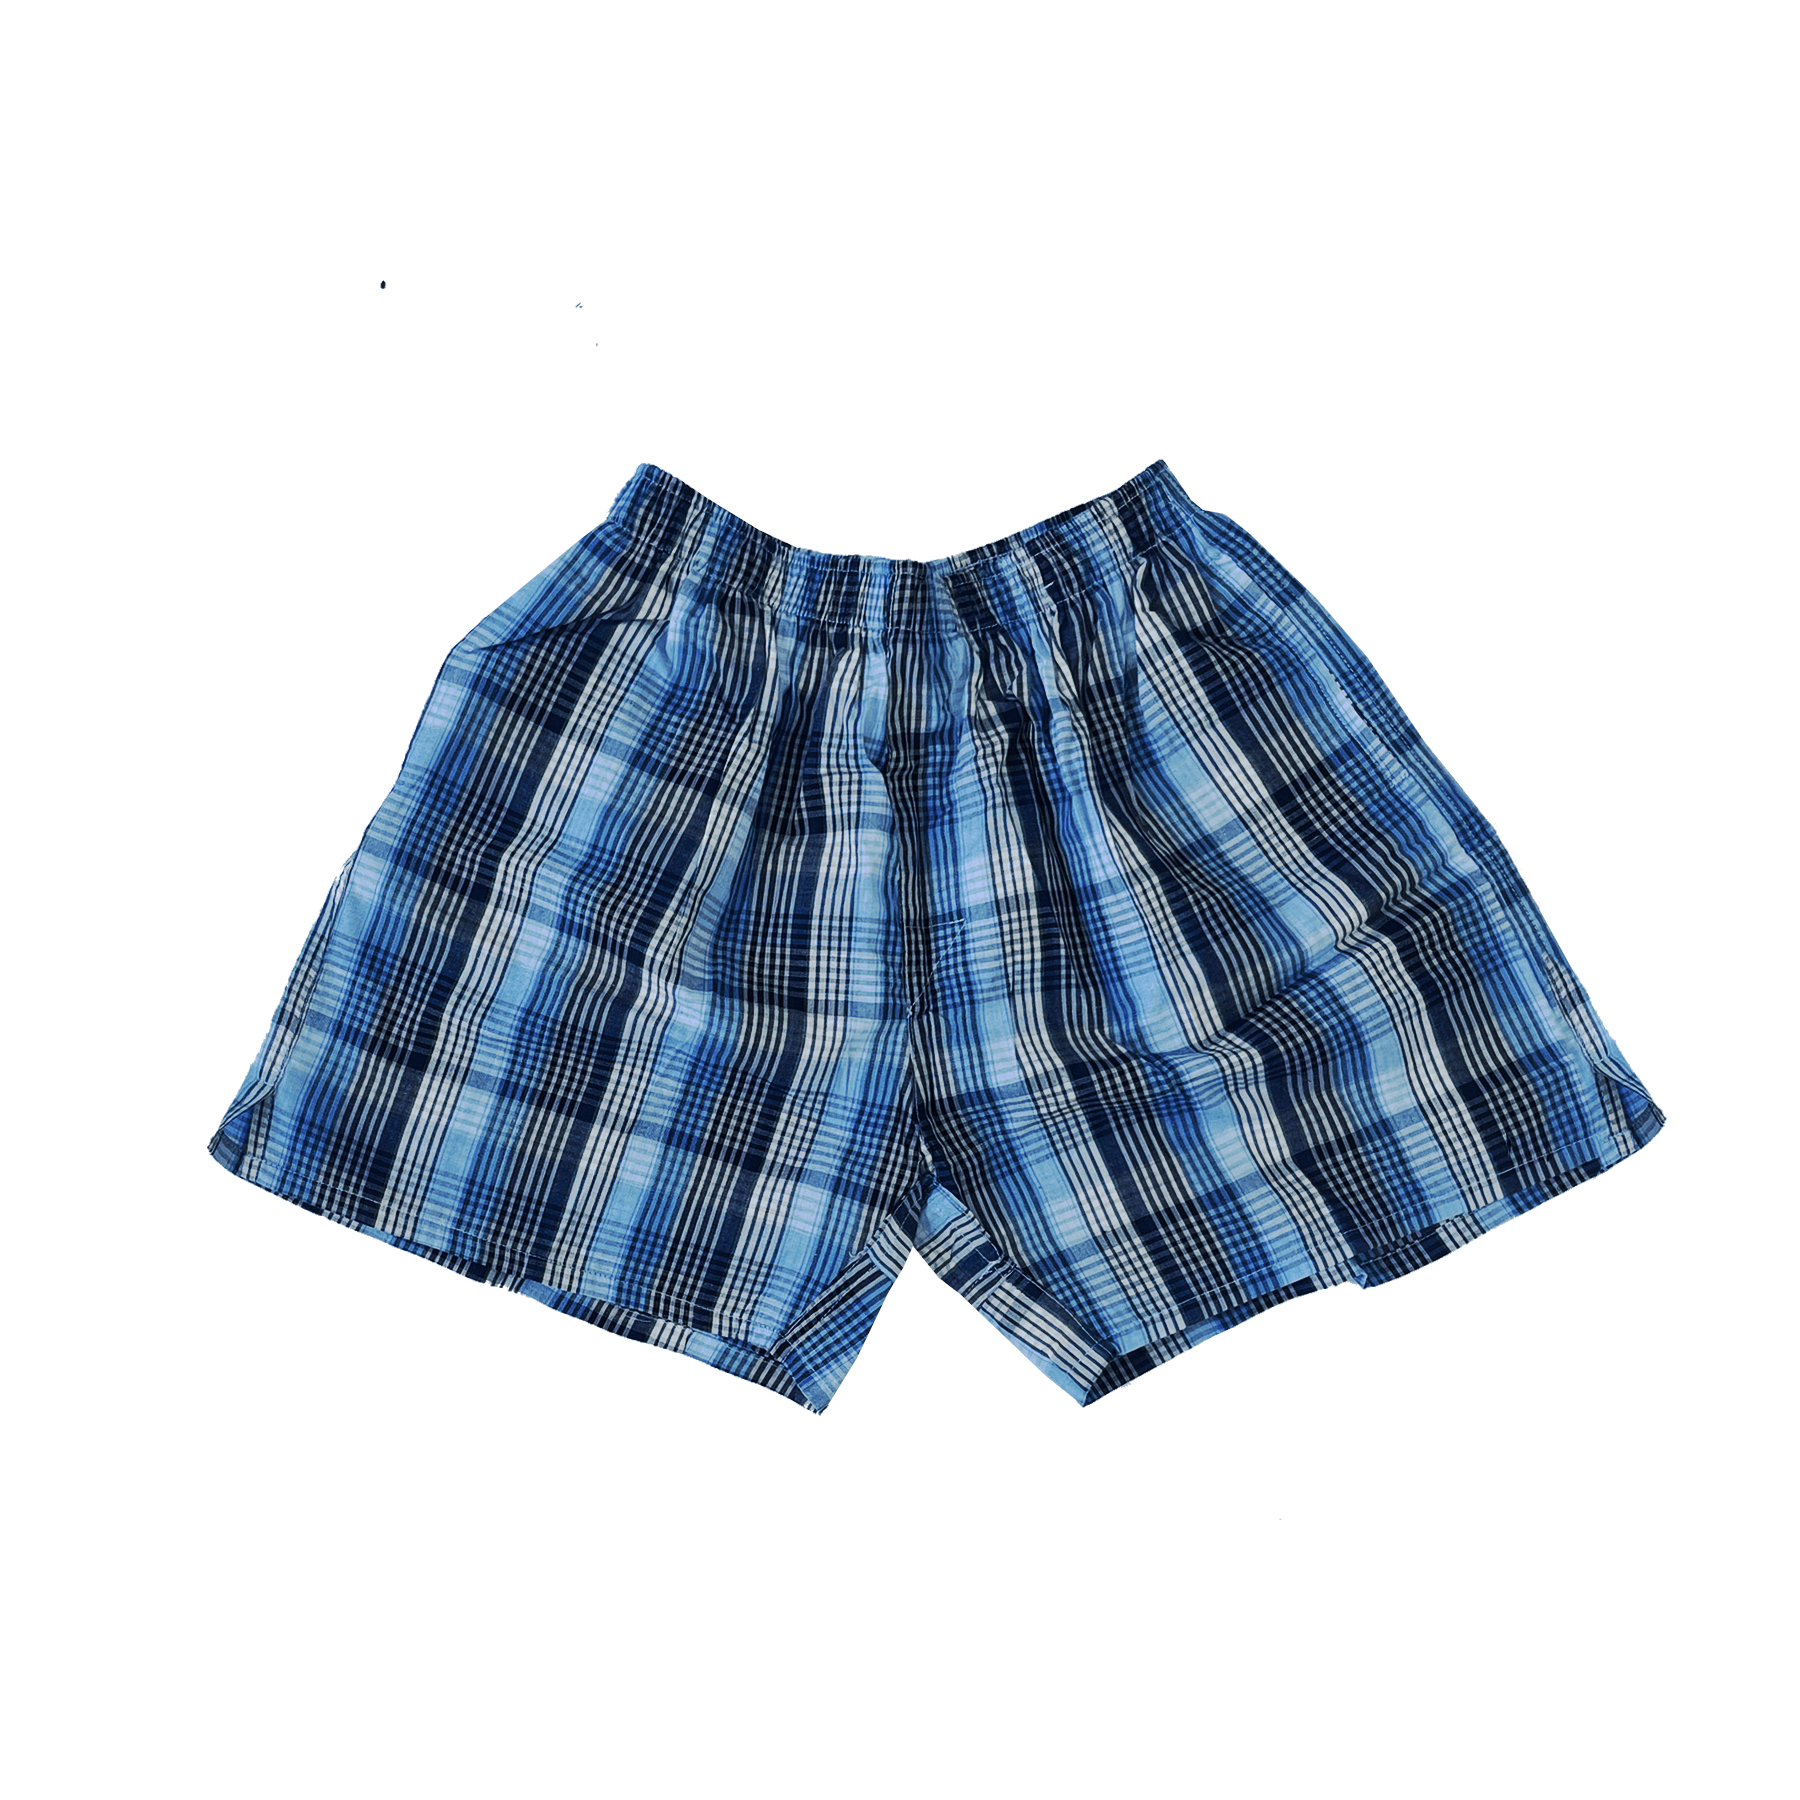 Short Pant Customized Service Ready To Ship Cheap Price Odm Each One In Opp Bag Made In Vietnam Manufacturer 3